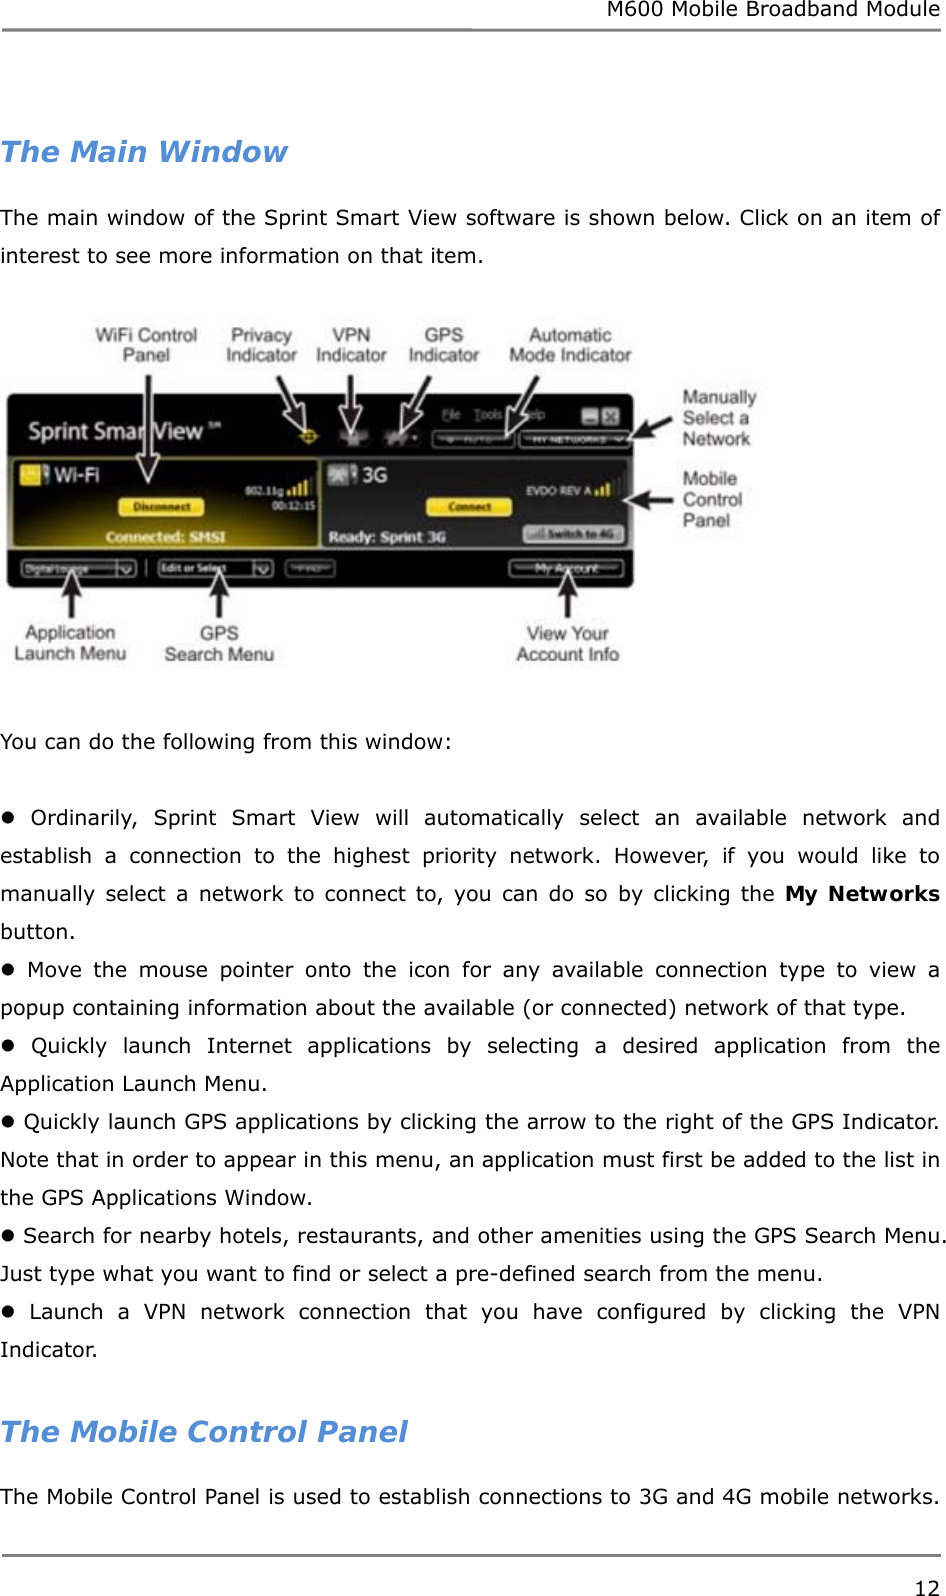 M600 Mobile Broadband Module 12   The Main Window The main window of the Sprint Smart View software is shown below. Click on an item of interest to see more information on that item.    You can do the following from this window:   Ordinarily, Sprint Smart View will automatically select an available network and establish a connection to the highest priority network. However, if you would like to manually select a network to connect to, you can do so by clicking the My Networks button.  Move the mouse pointer onto the icon for any available connection type to view a popup containing information about the available (or connected) network of that type.  Quickly launch Internet applications by selecting a desired application from the Application Launch Menu.  Quickly launch GPS applications by clicking the arrow to the right of the GPS Indicator. Note that in order to appear in this menu, an application must first be added to the list in the GPS Applications Window.  Search for nearby hotels, restaurants, and other amenities using the GPS Search Menu. Just type what you want to find or select a pre-defined search from the menu.  Launch a VPN network connection that you have configured by clicking the VPN Indicator.  The Mobile Control Panel The Mobile Control Panel is used to establish connections to 3G and 4G mobile networks. 